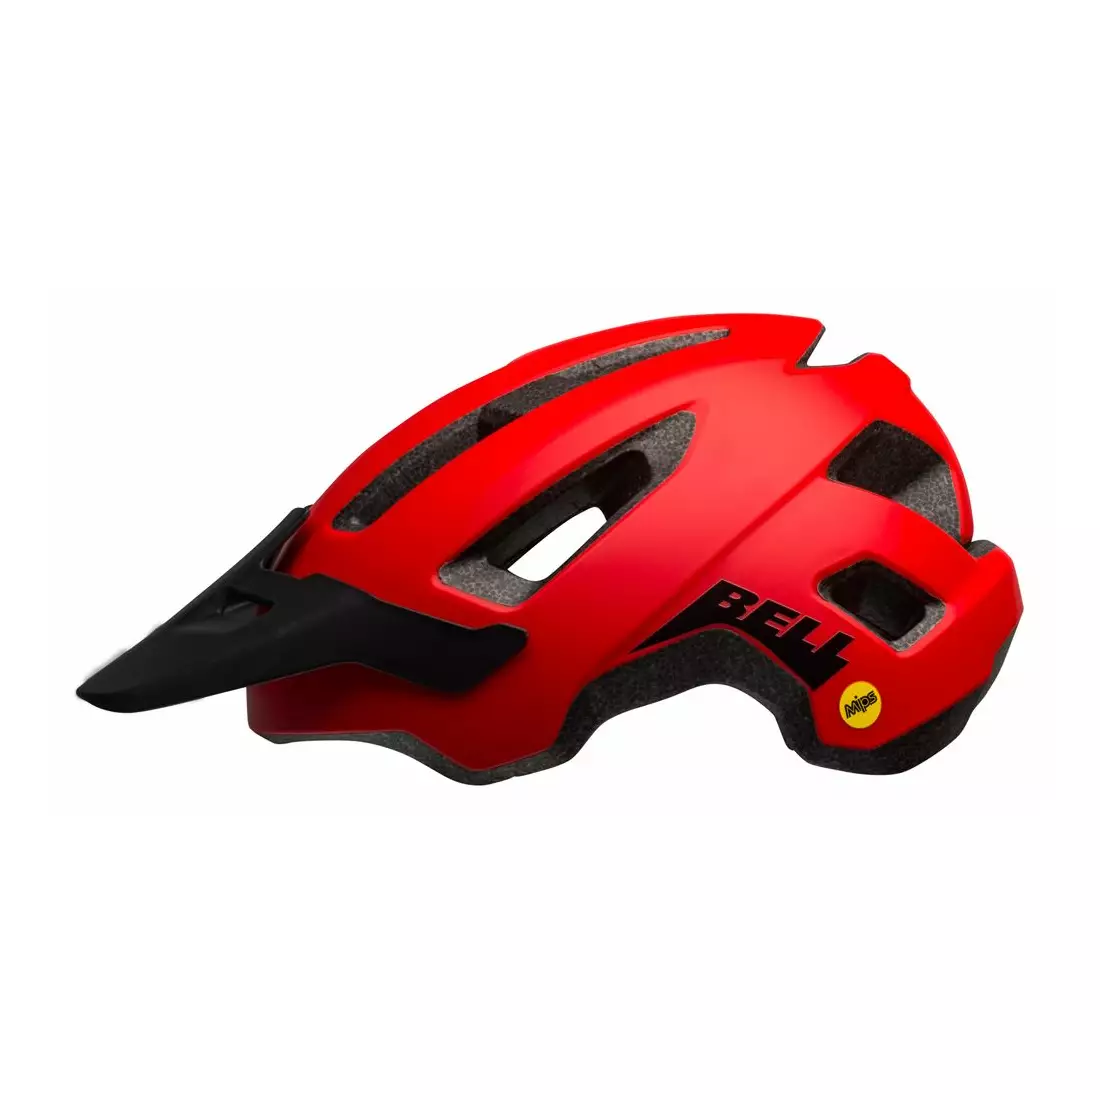 Fahrradhelm mtb BELL NOMAD INTEGRATED MIPS mate red black